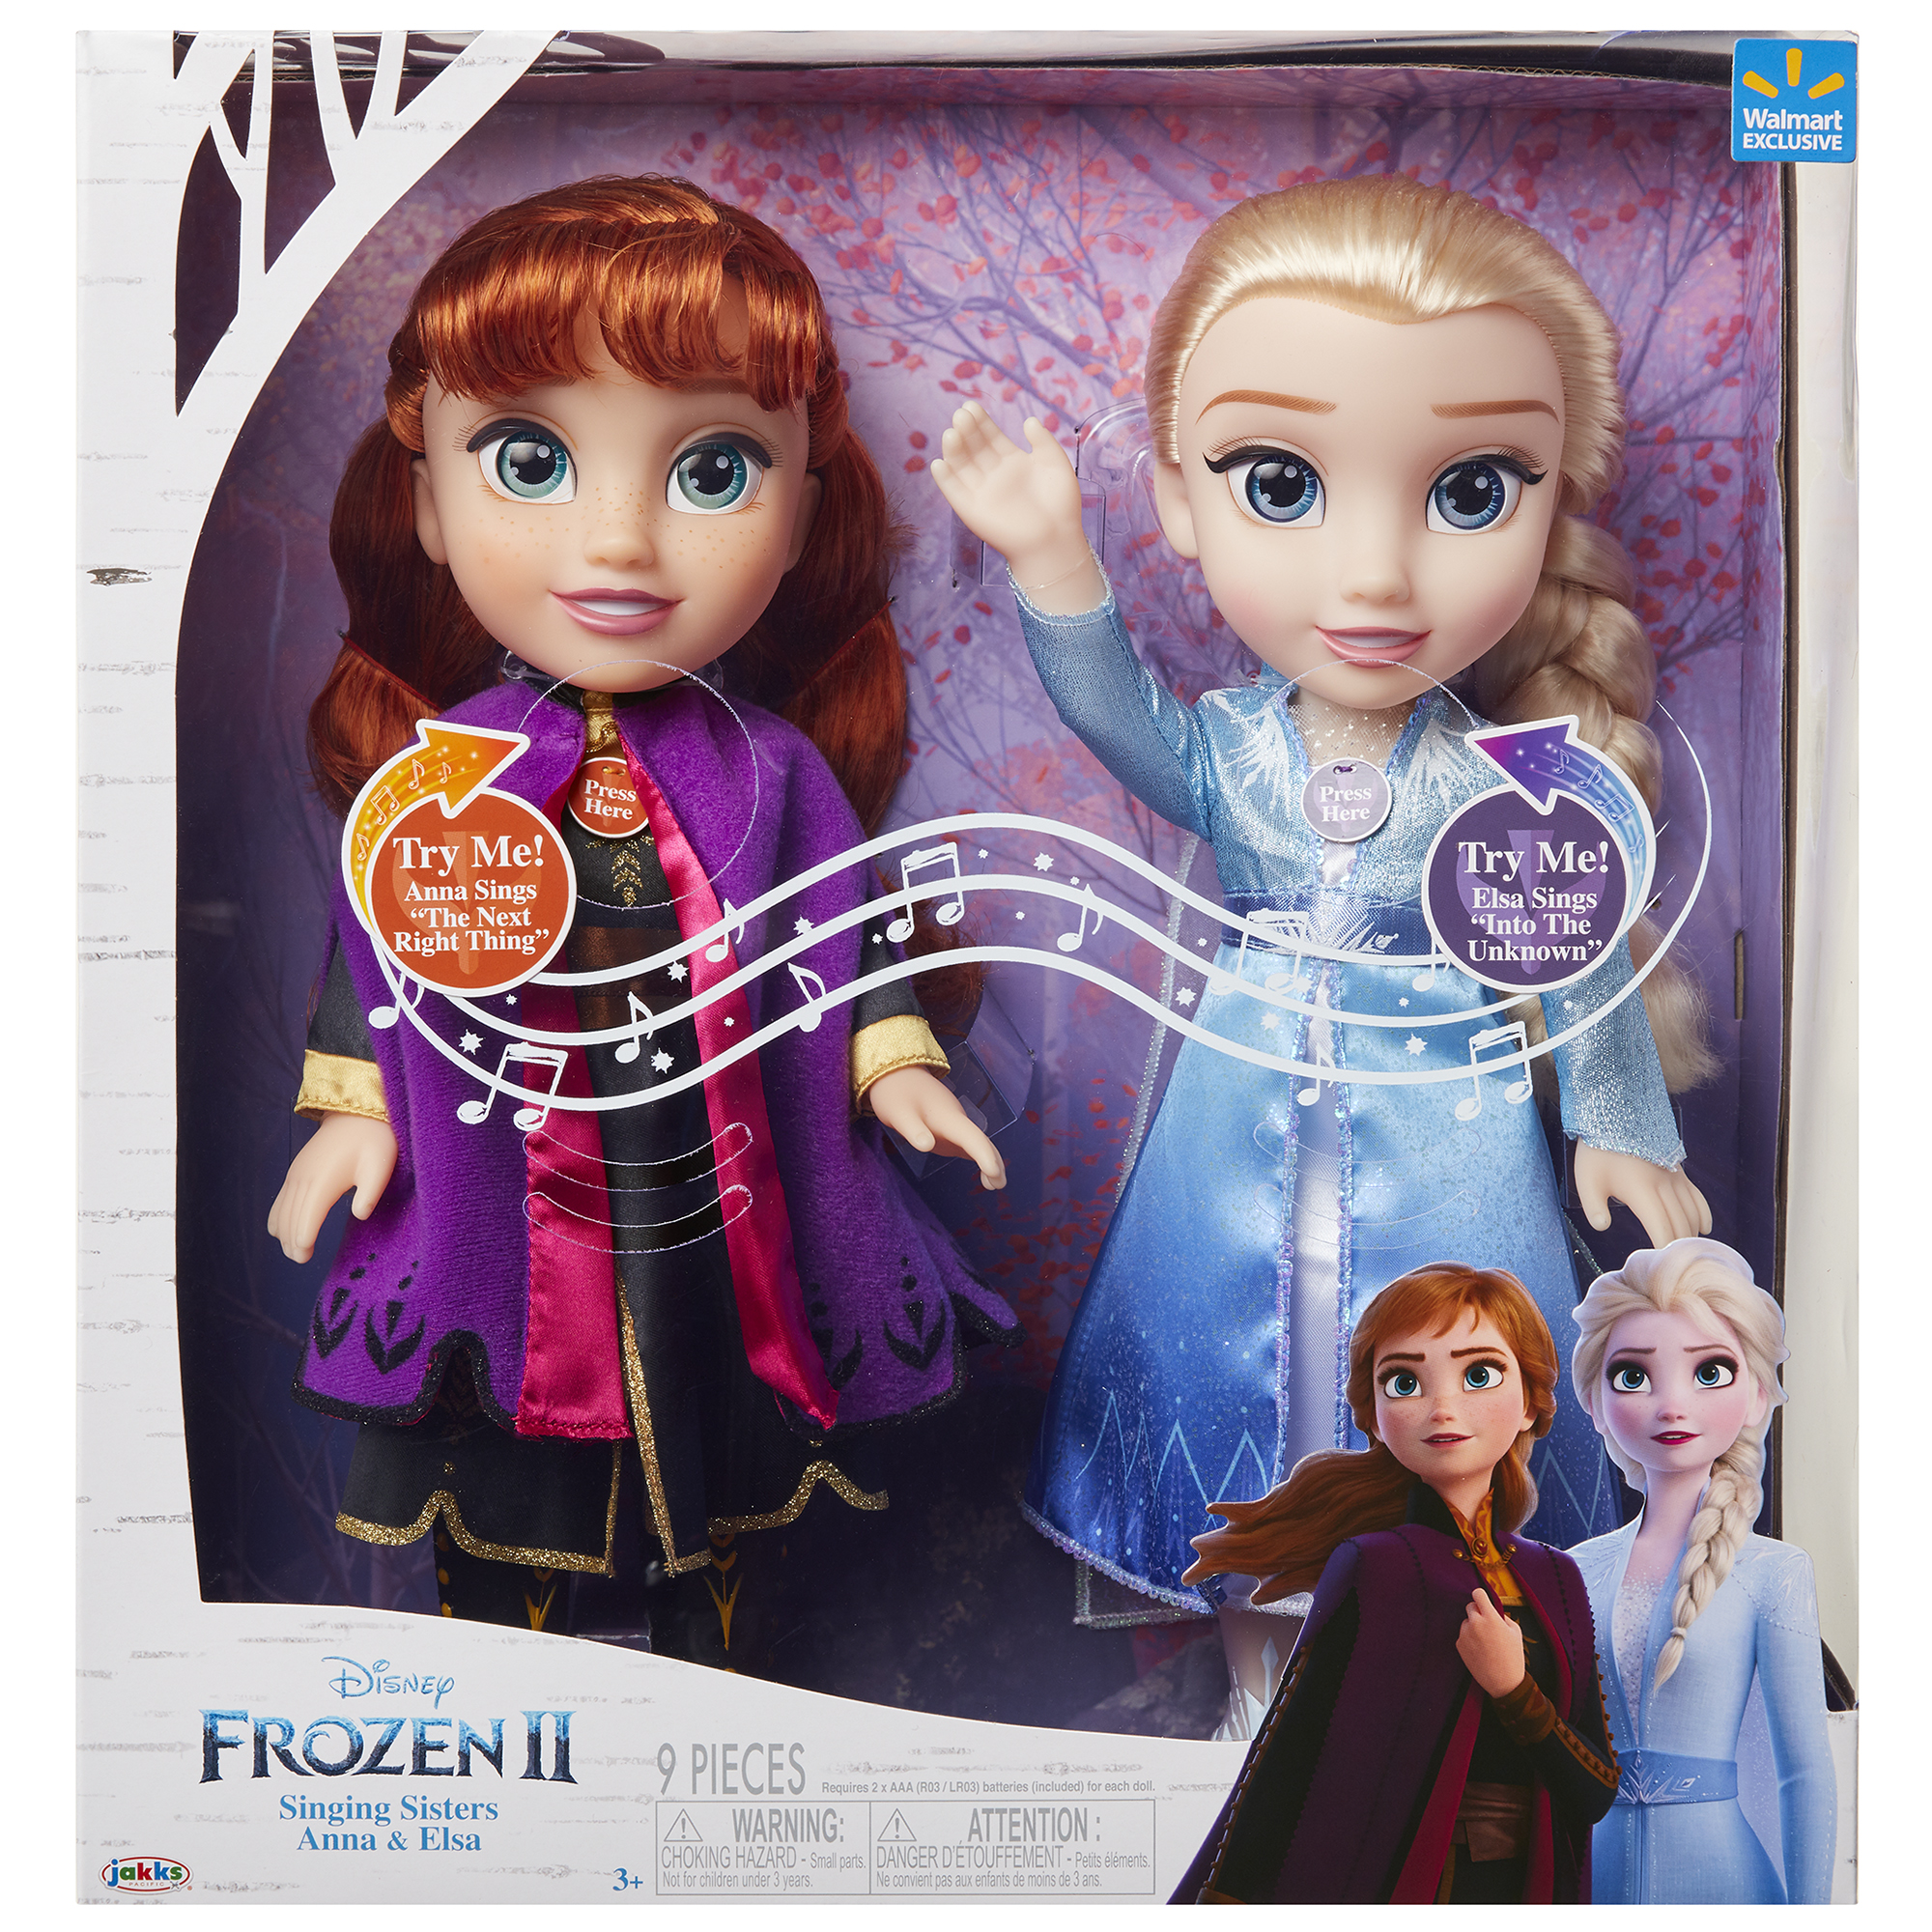 Disney Princess Anna and Elsa 14 Inch Singing Sisters Feature Fashion Doll 2 Pack - image 5 of 12